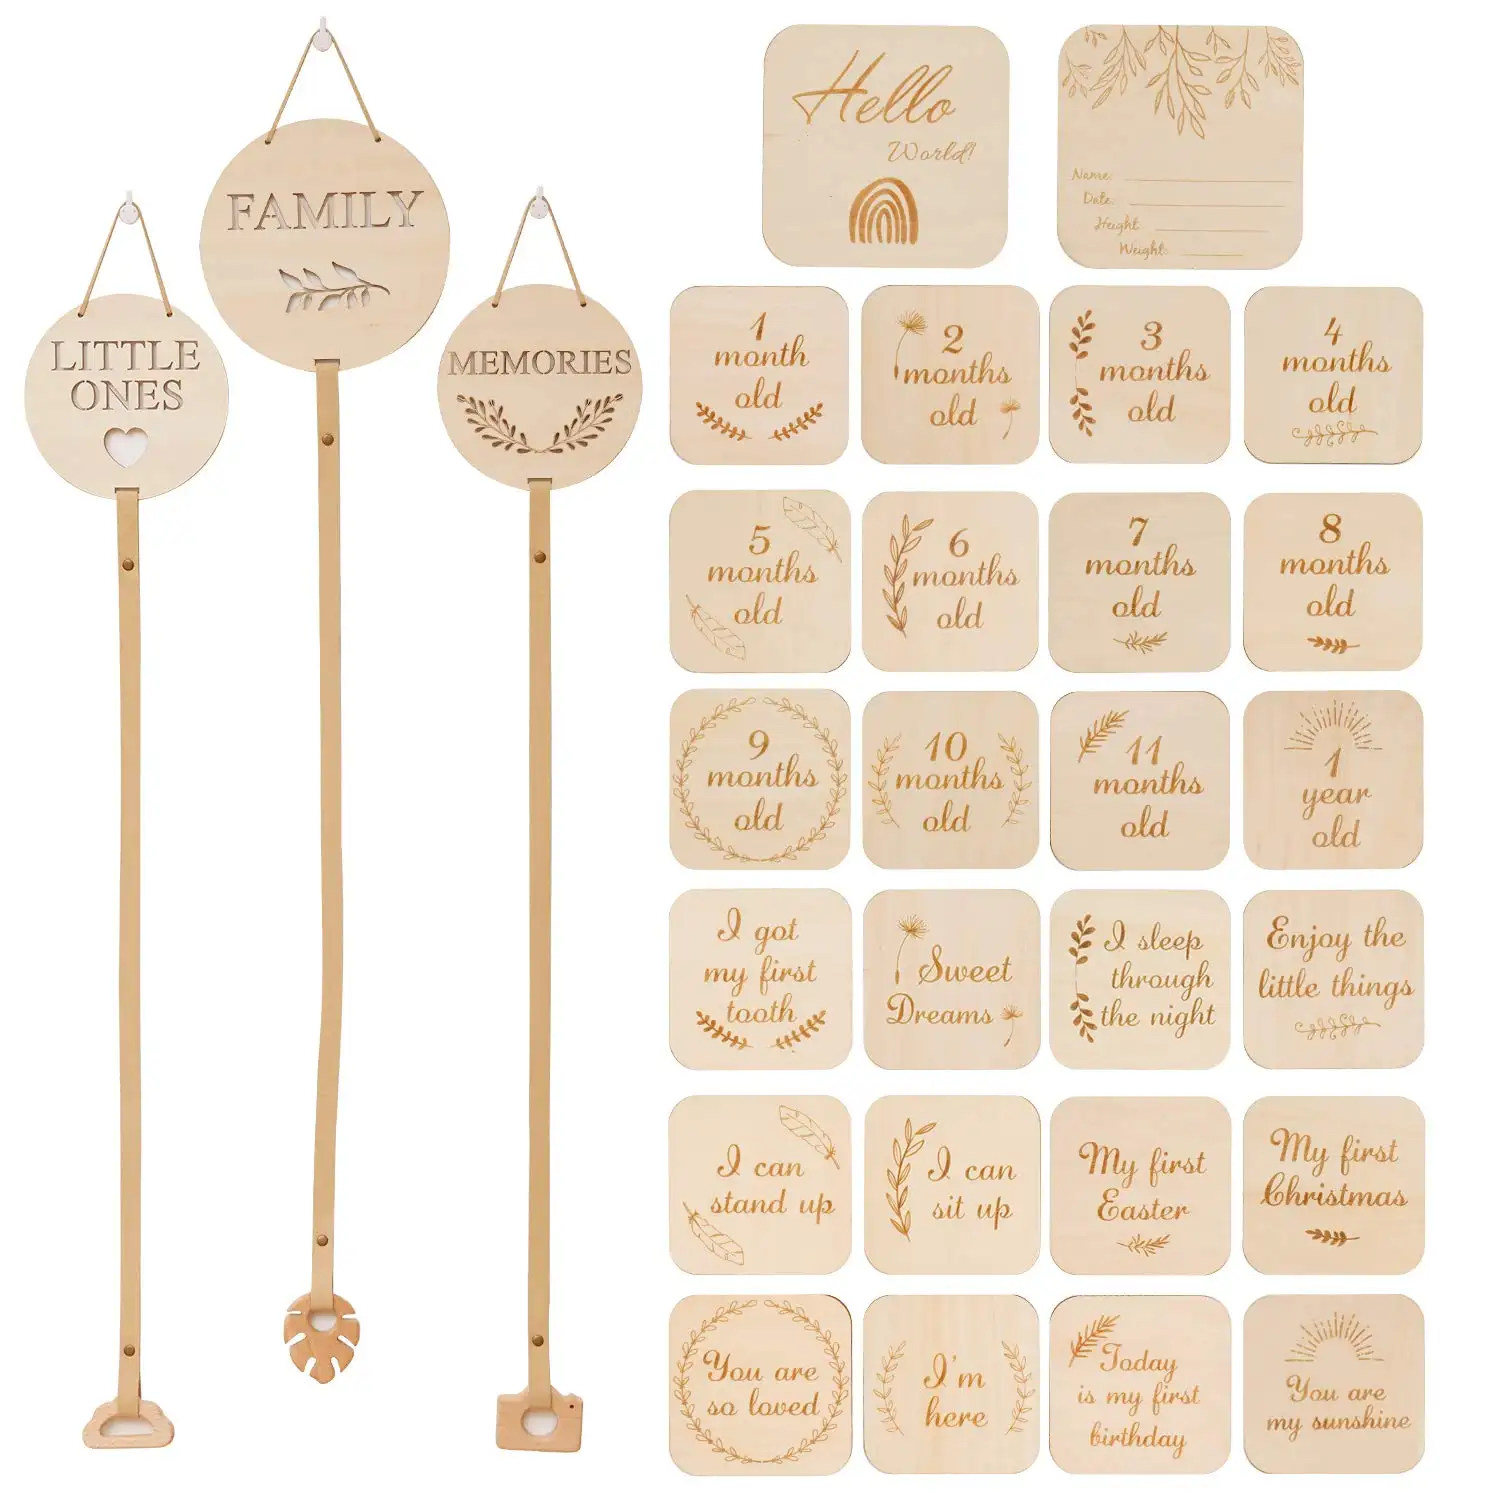 16 Double Sided Discs Wooden Picture Frames Hanging Photo Display With Drawstring Bag Baby Gift Monthly Milestone Cards